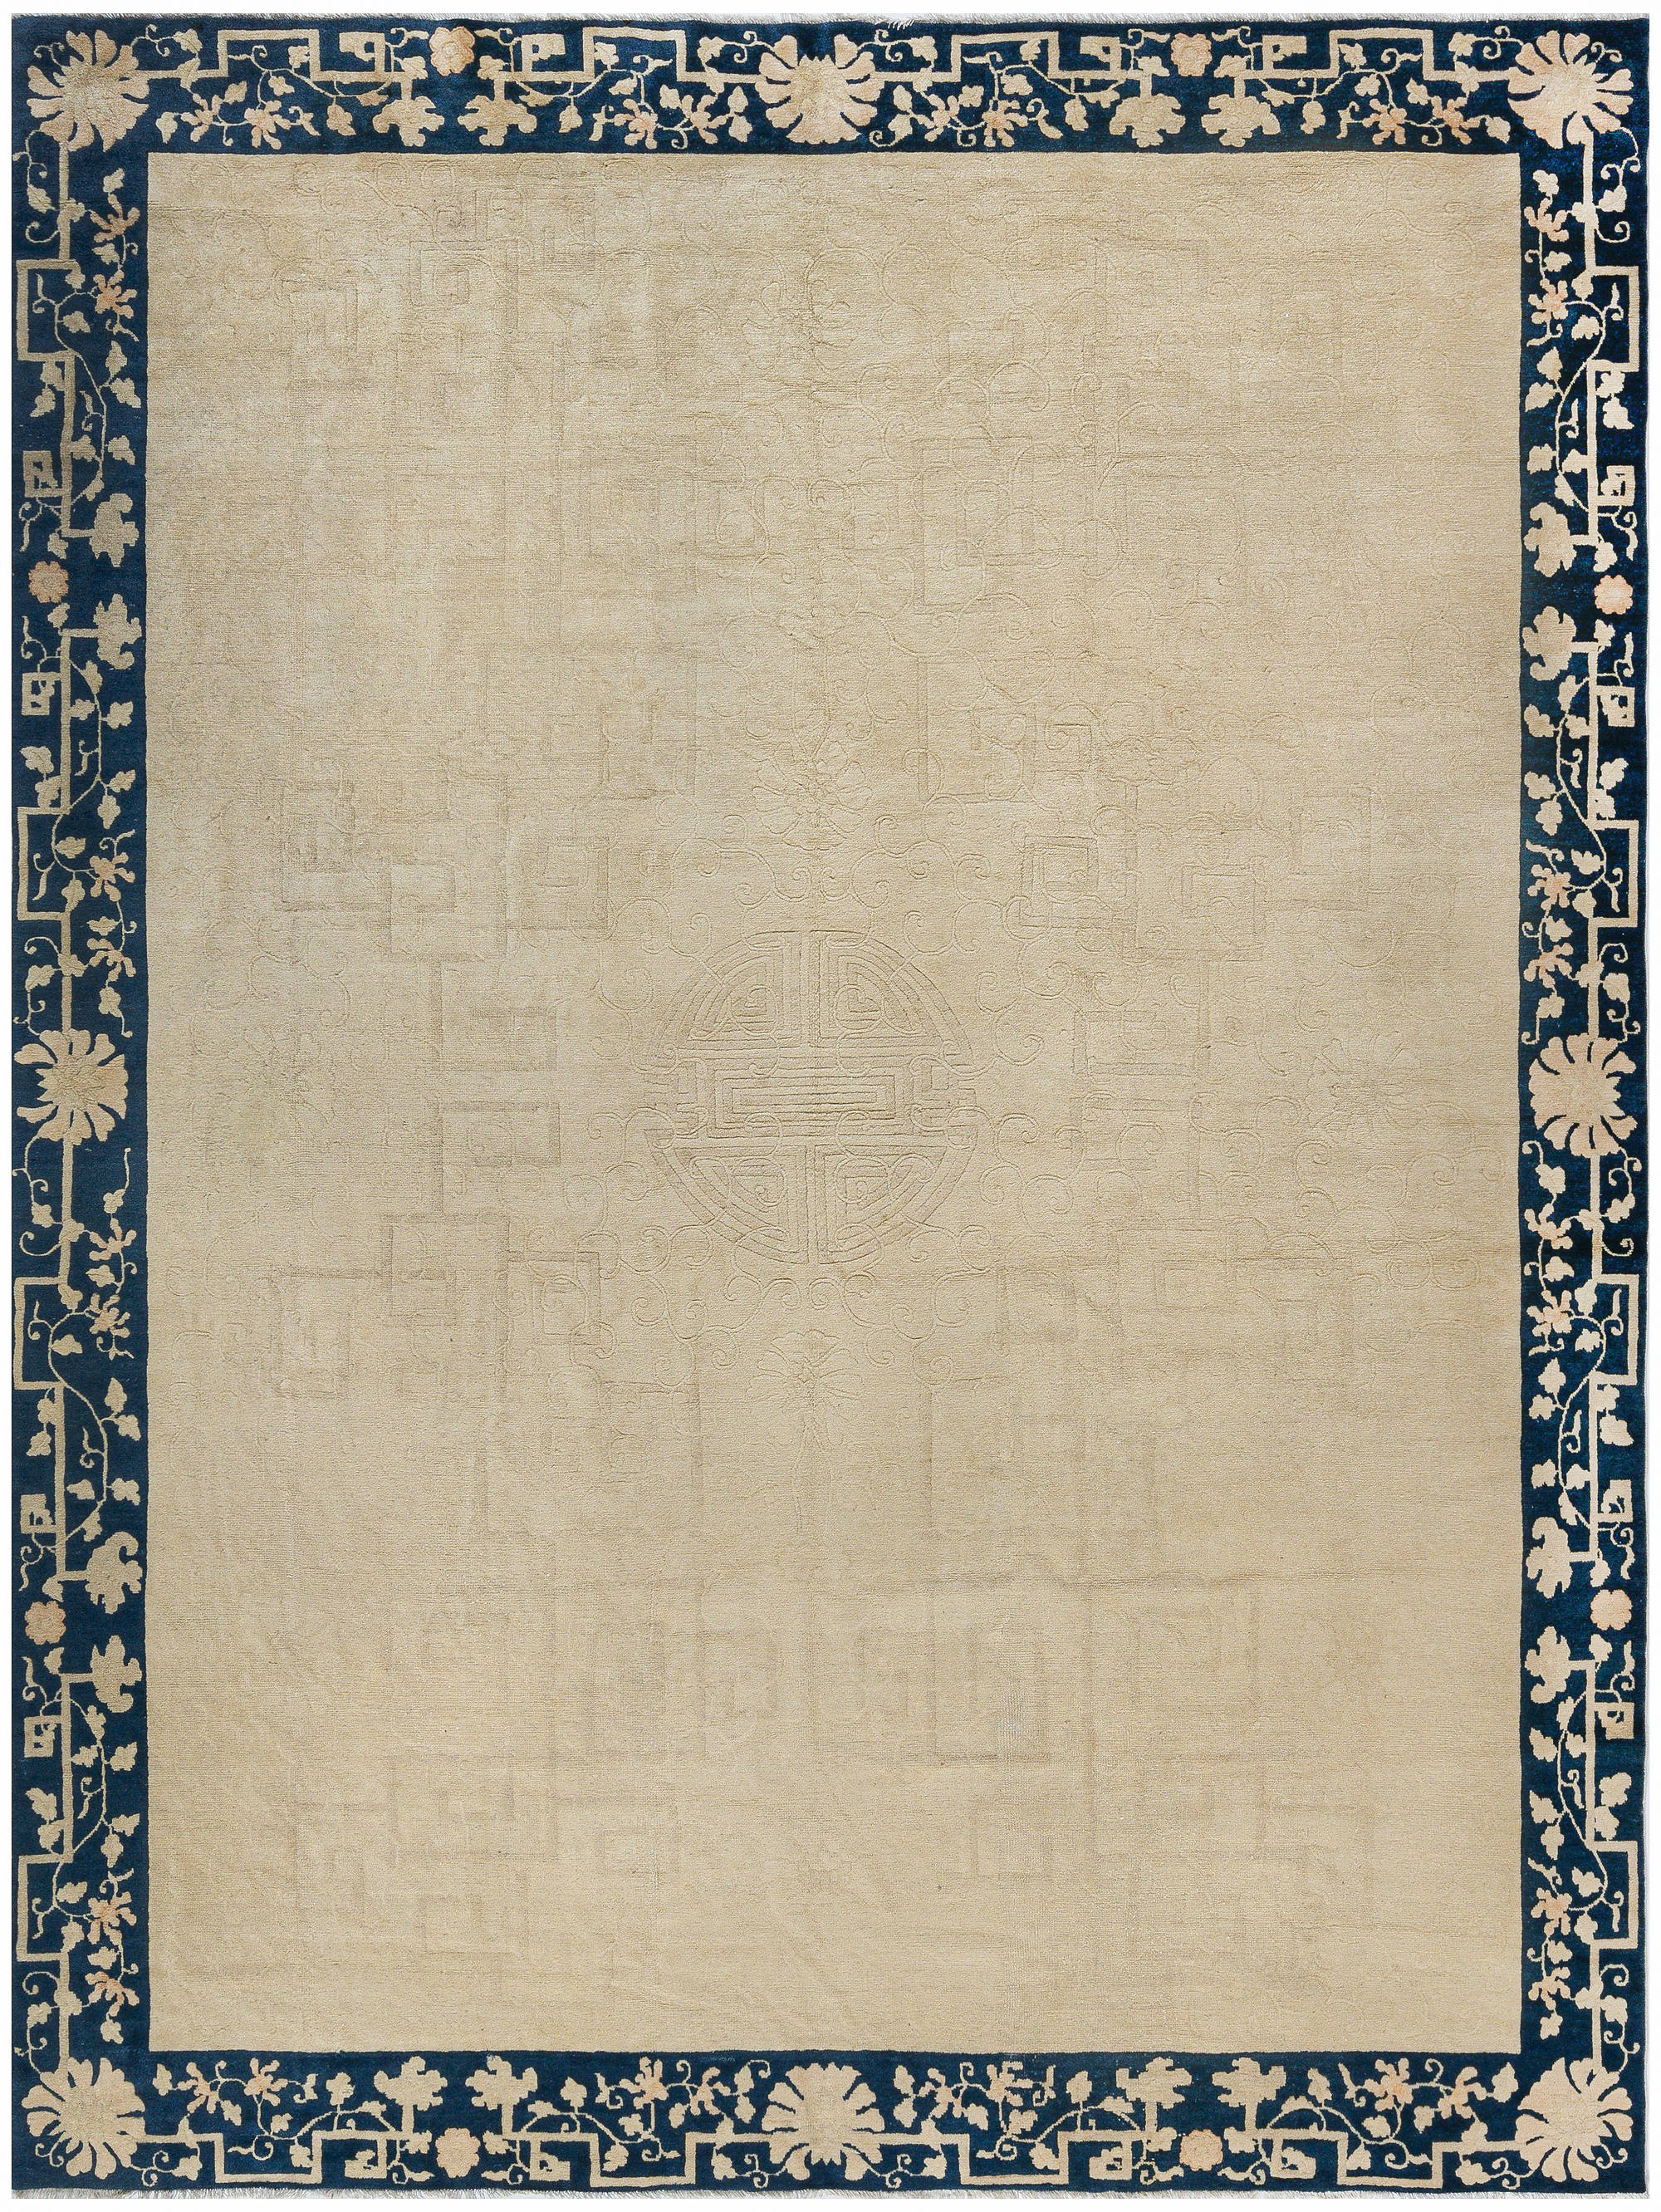 Early 20th Century Chinese Beige and <mark class='searchwp-highlight'>Blue</mark> Handmade Wool Rug BB7347